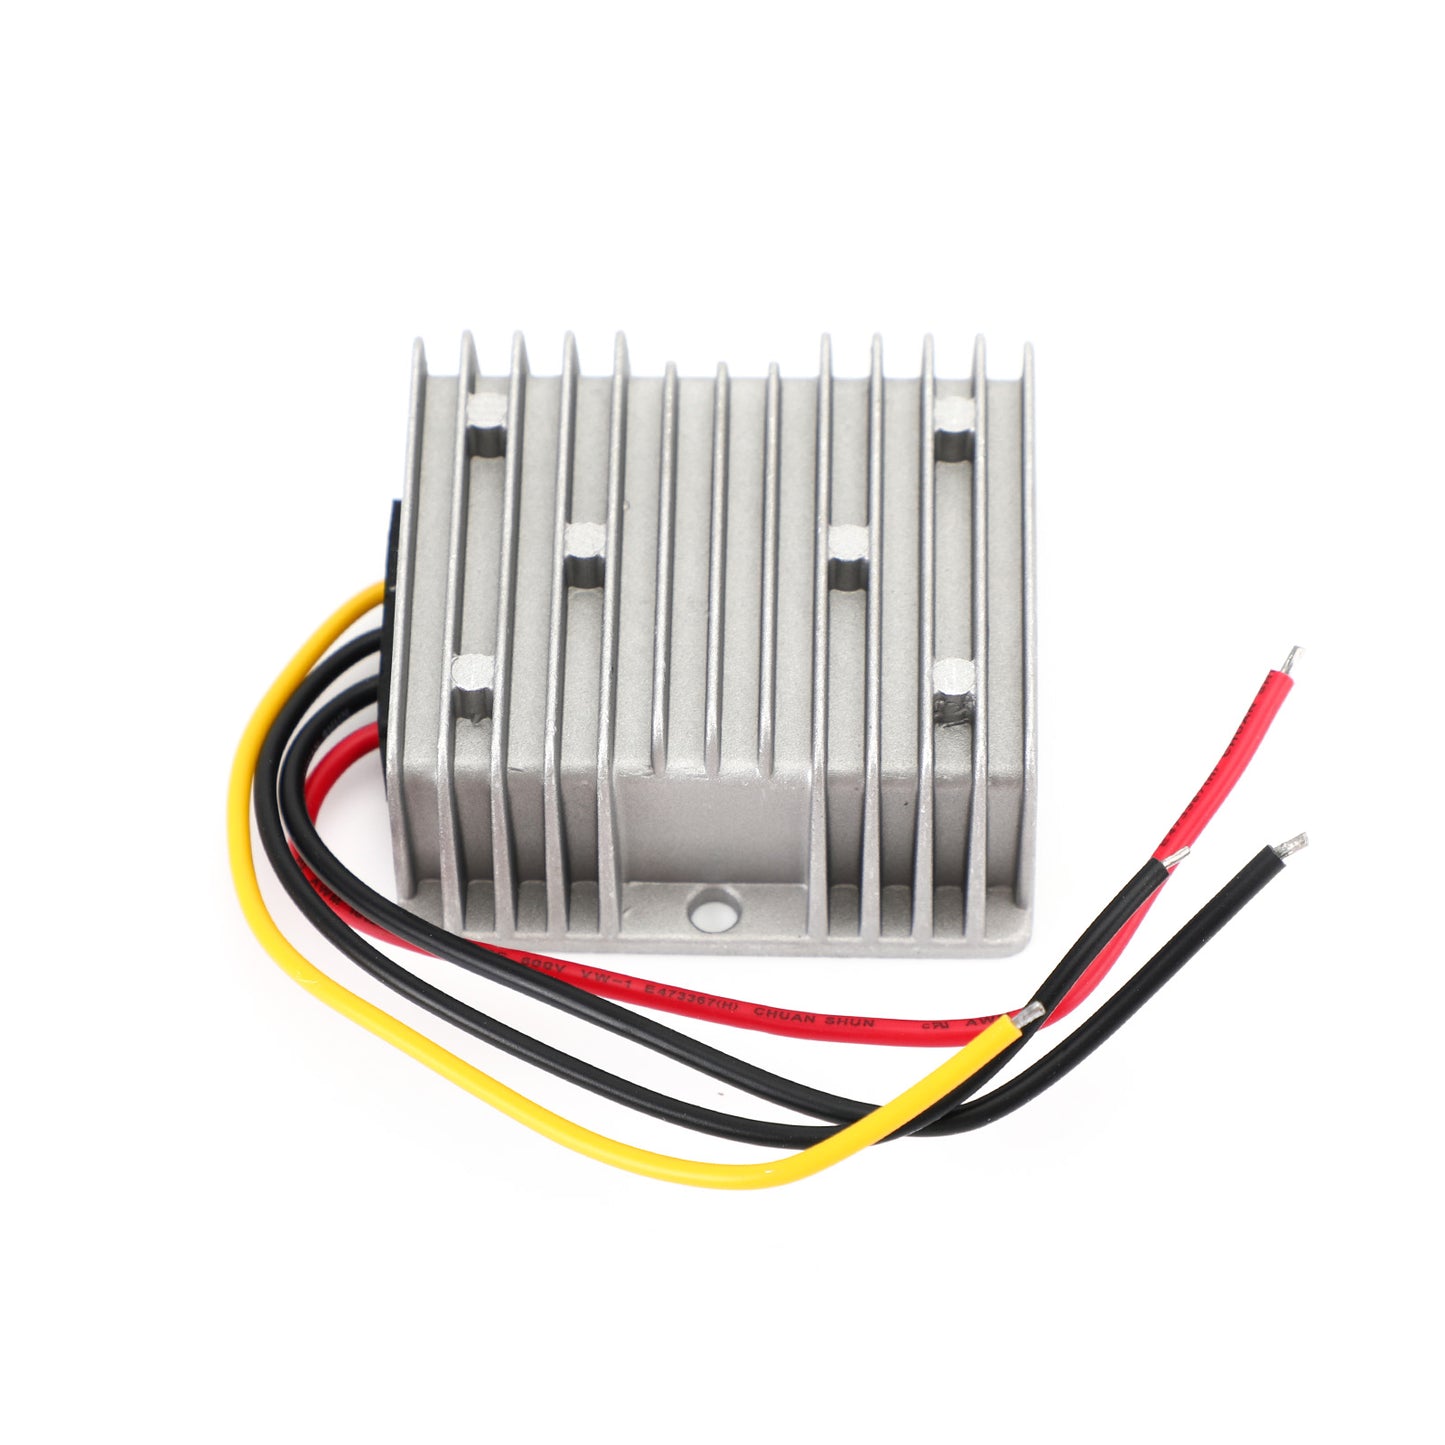 24V Auf 48V DC-DC Step Up Boost Spannungswandler 3A 144W Industrie-Netzteile